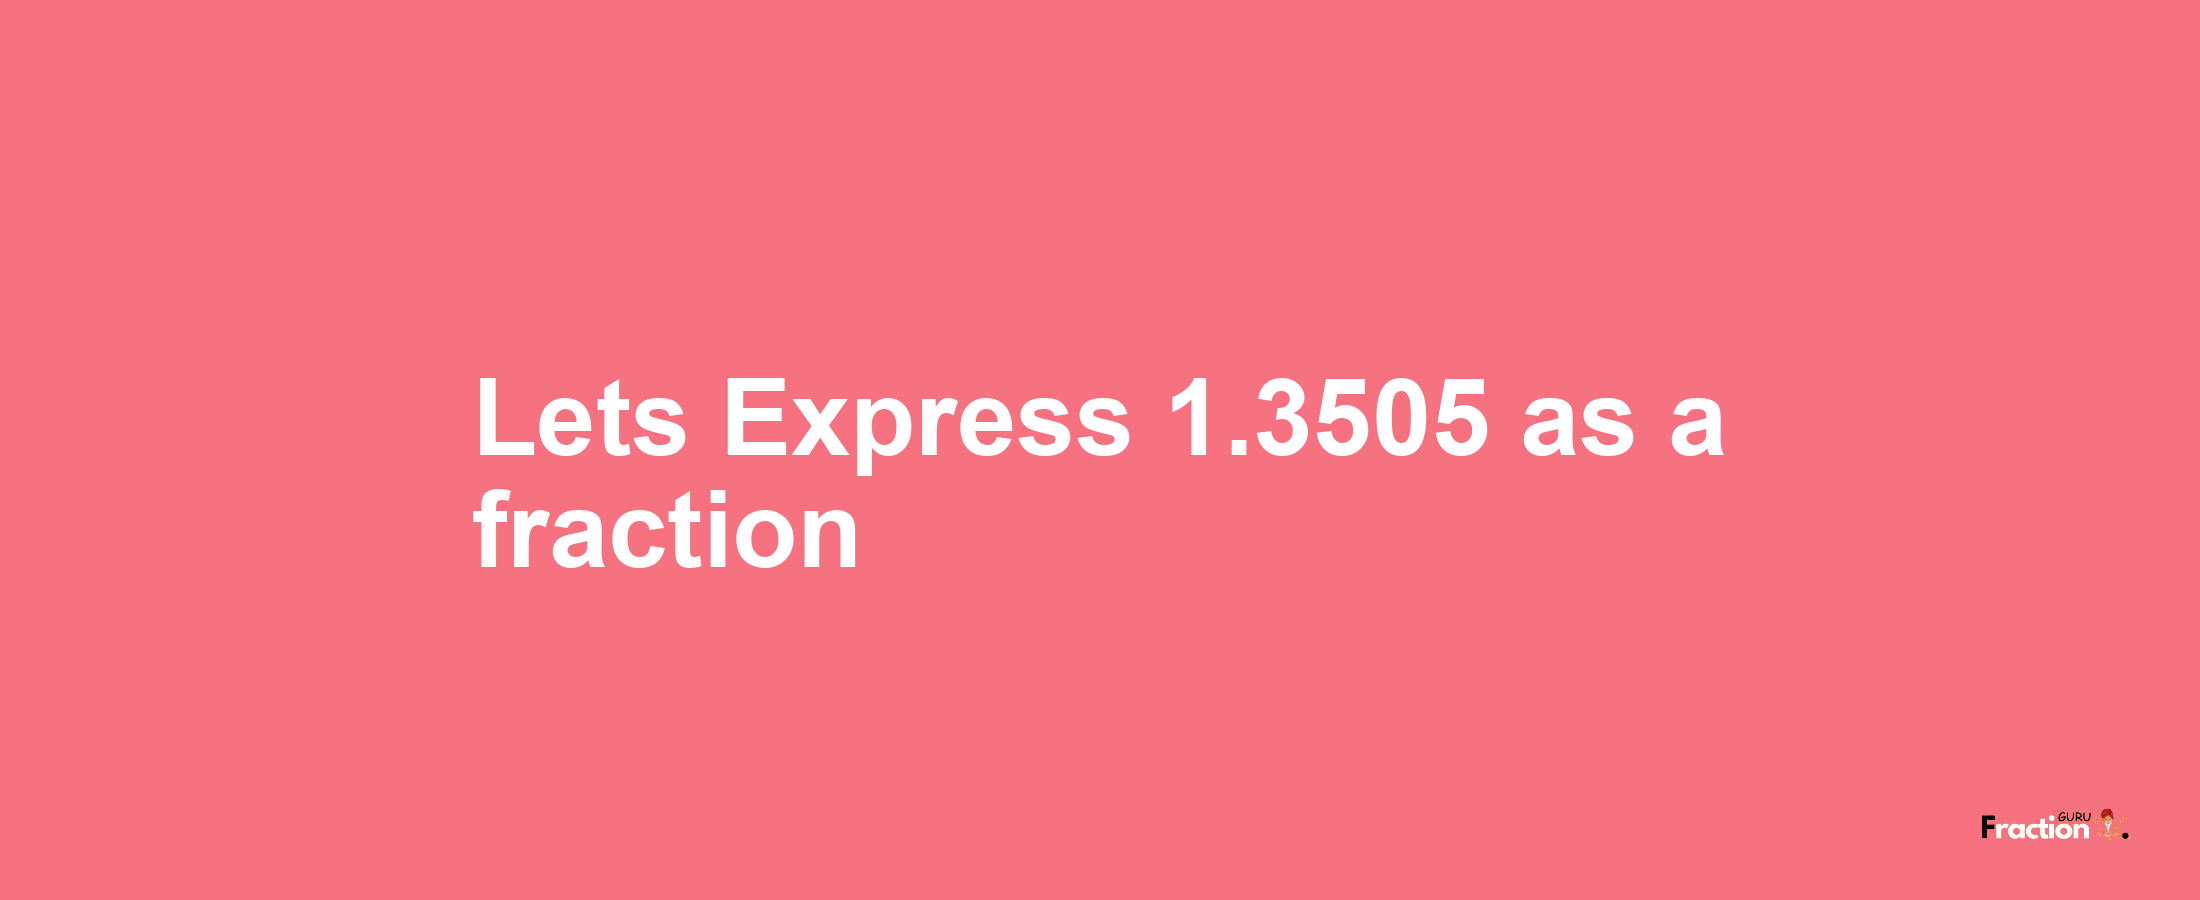 Lets Express 1.3505 as afraction